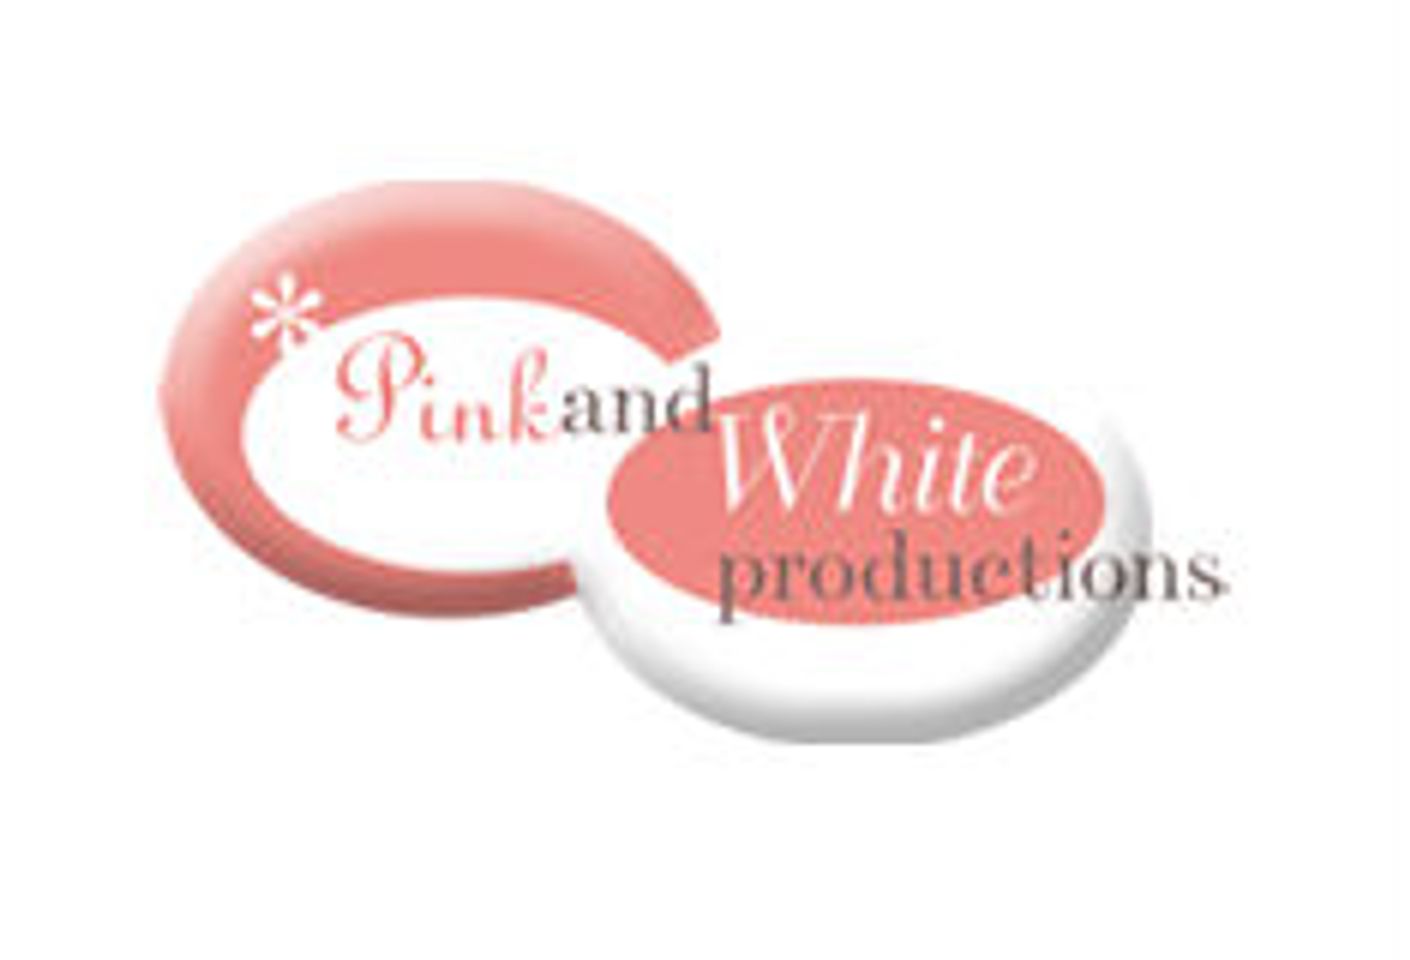 Pink & White Productions Voted Best Porn Studio by SF Bay Guardian